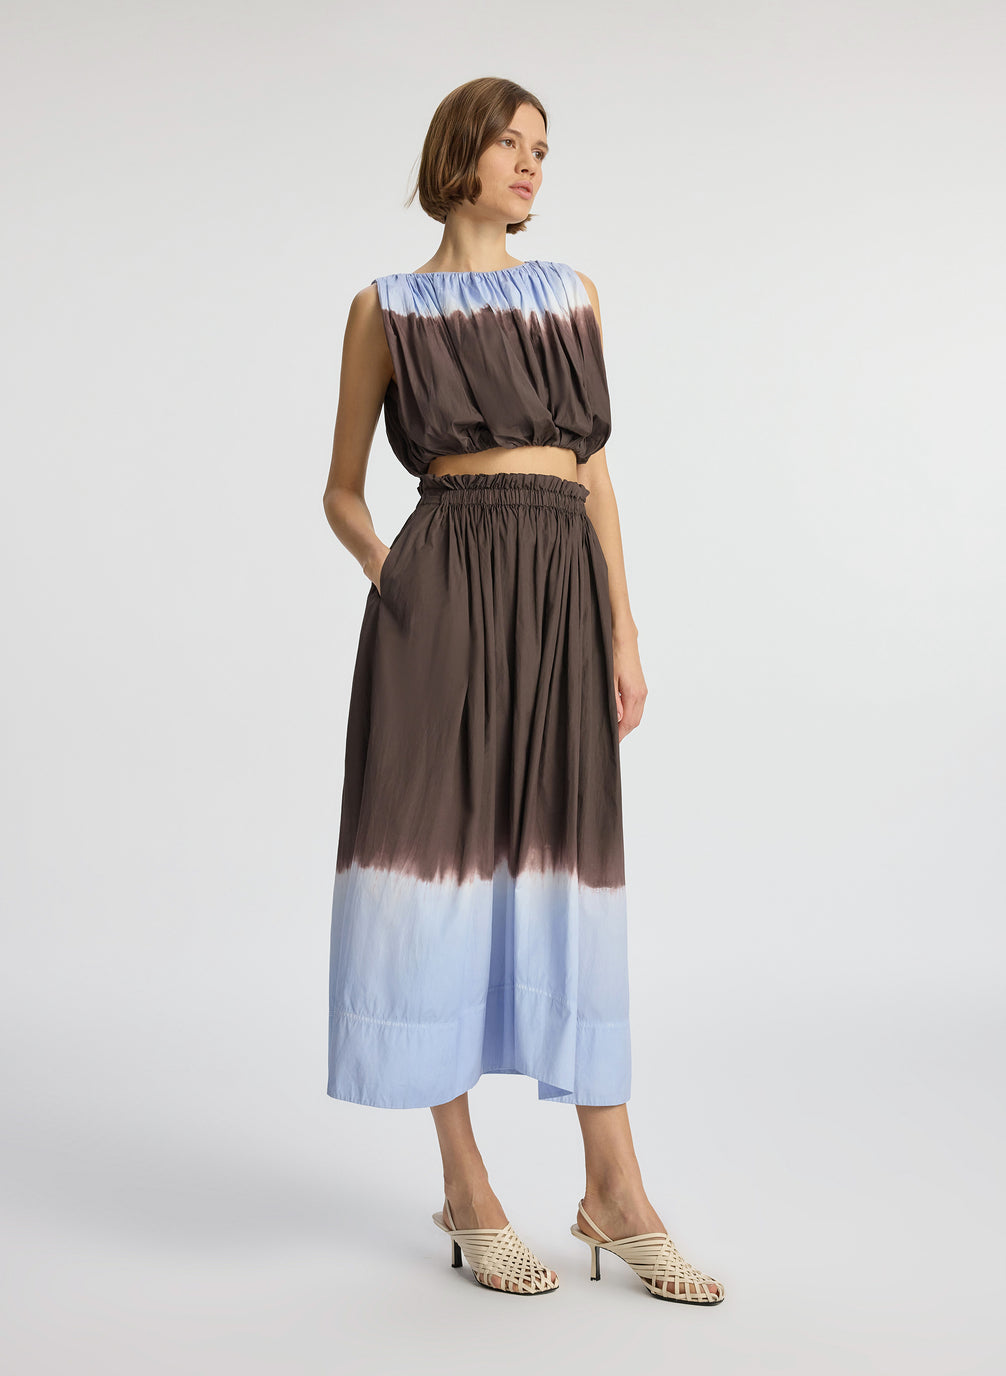 side view of woman wearing brown and light blue dip dye sleeveless top and matching midi skirt